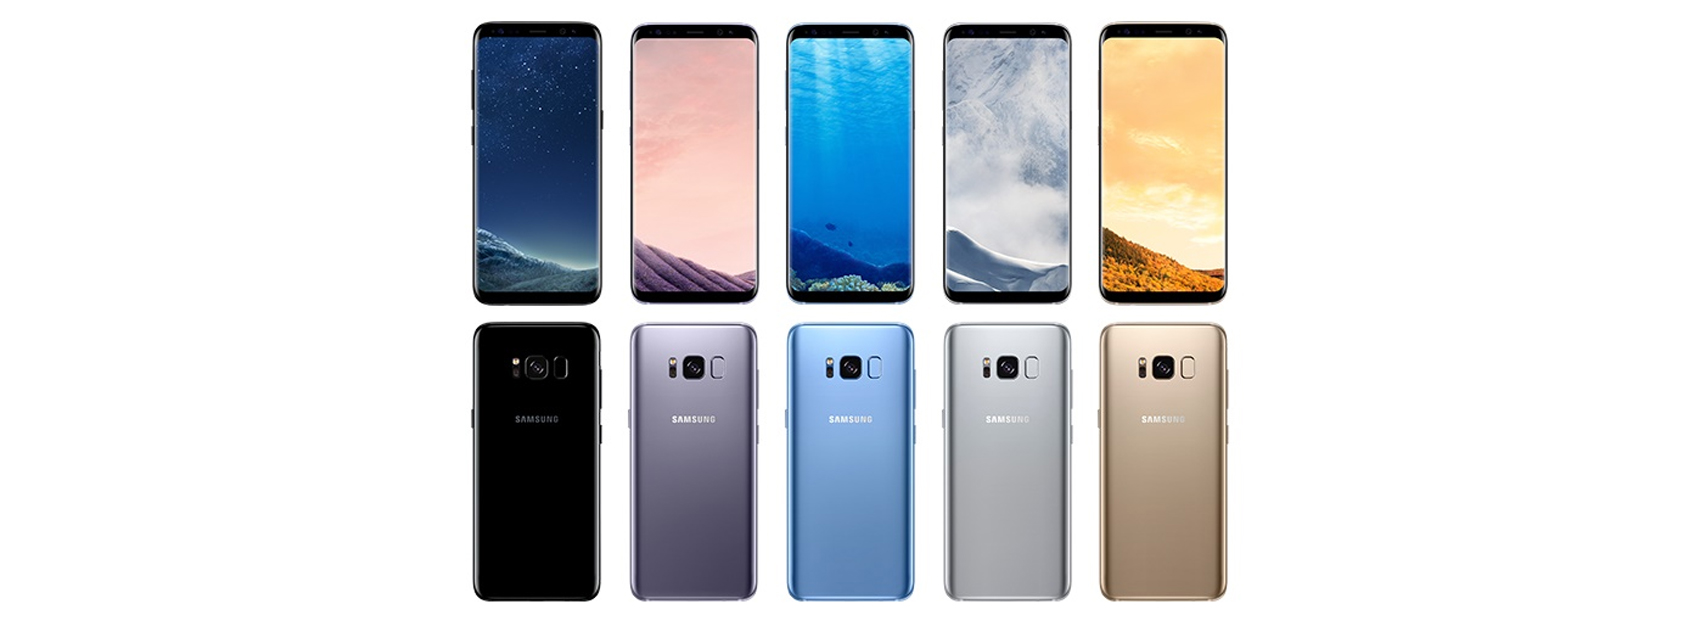 Samsung Facts,Startup Stories,Startup Business News India,Technology News 2018,Interesting Facts About Samsung,Samsung Facts 2018,Interesting Samsung Facts,Lesser Known Facts About Samsung,Amazing Facts About Samsung,Unknown Facts about Samsung Phones